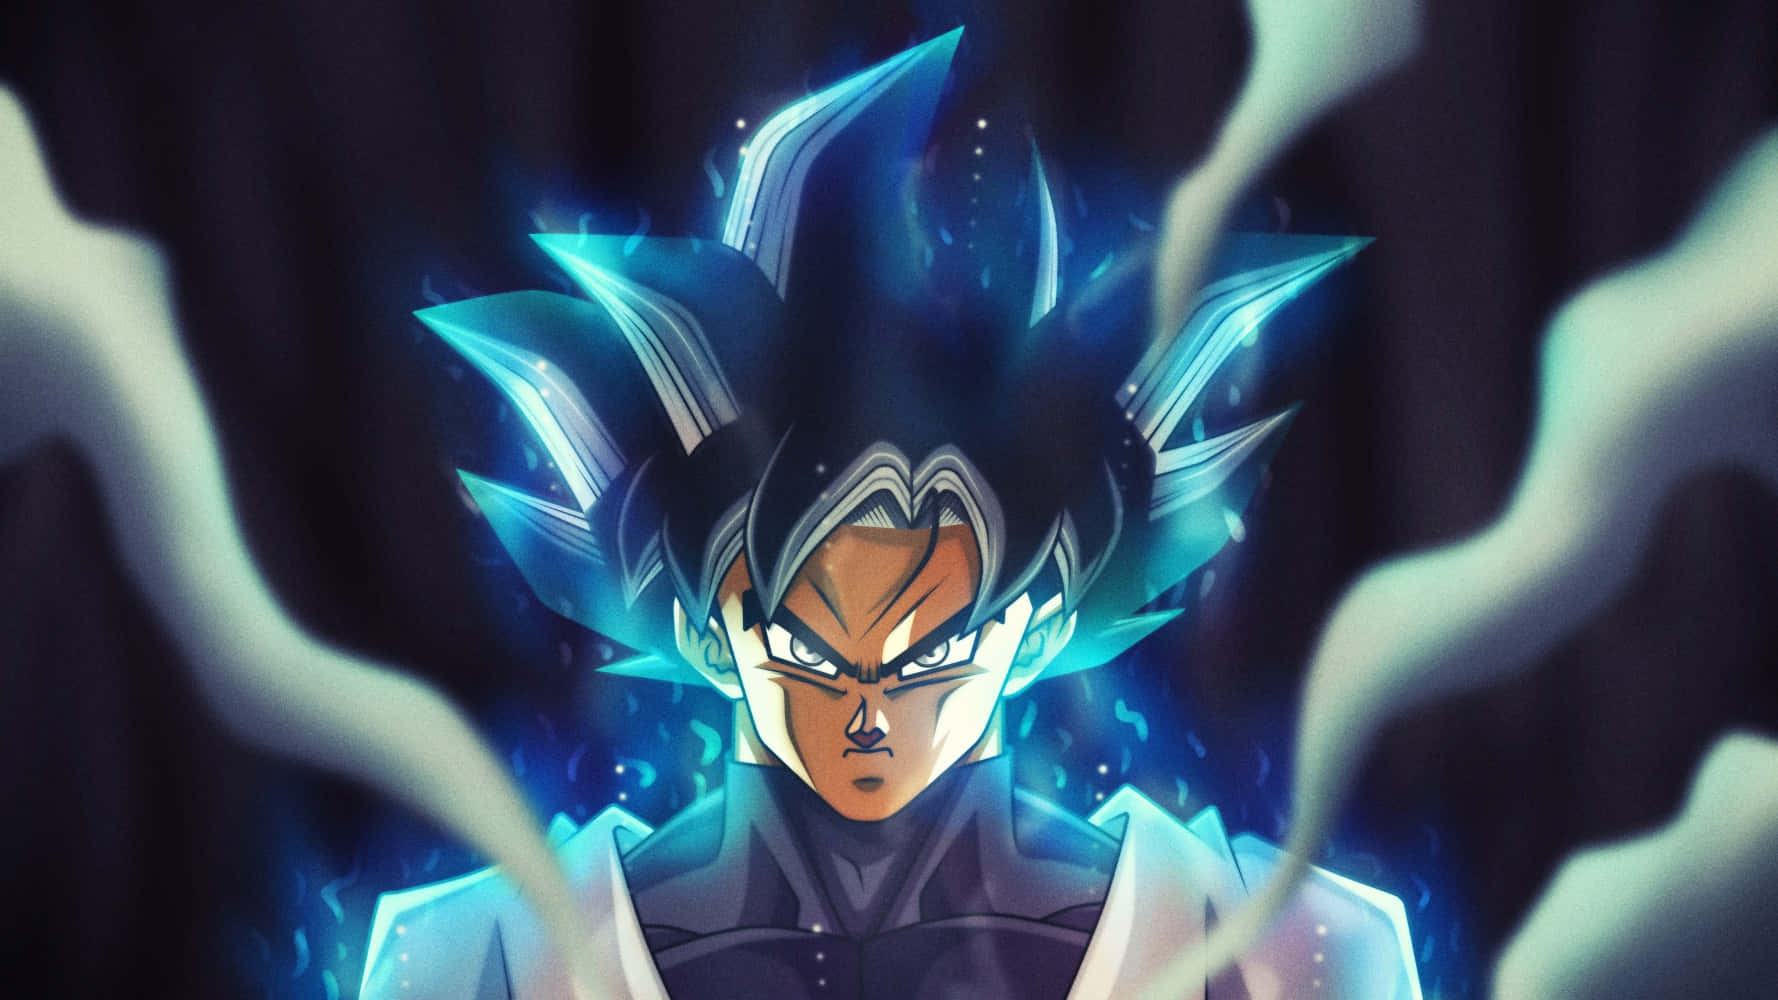 Goku Black stands strong against his opponents.